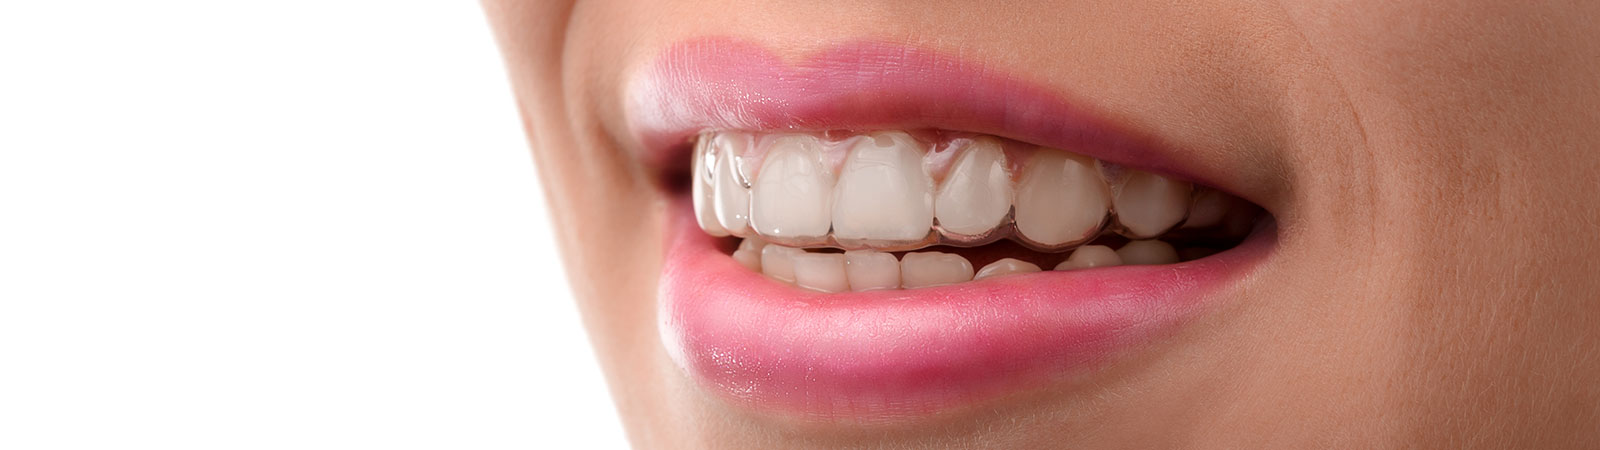 Invisalign Before and After Invisalign Reviews Philadelphia